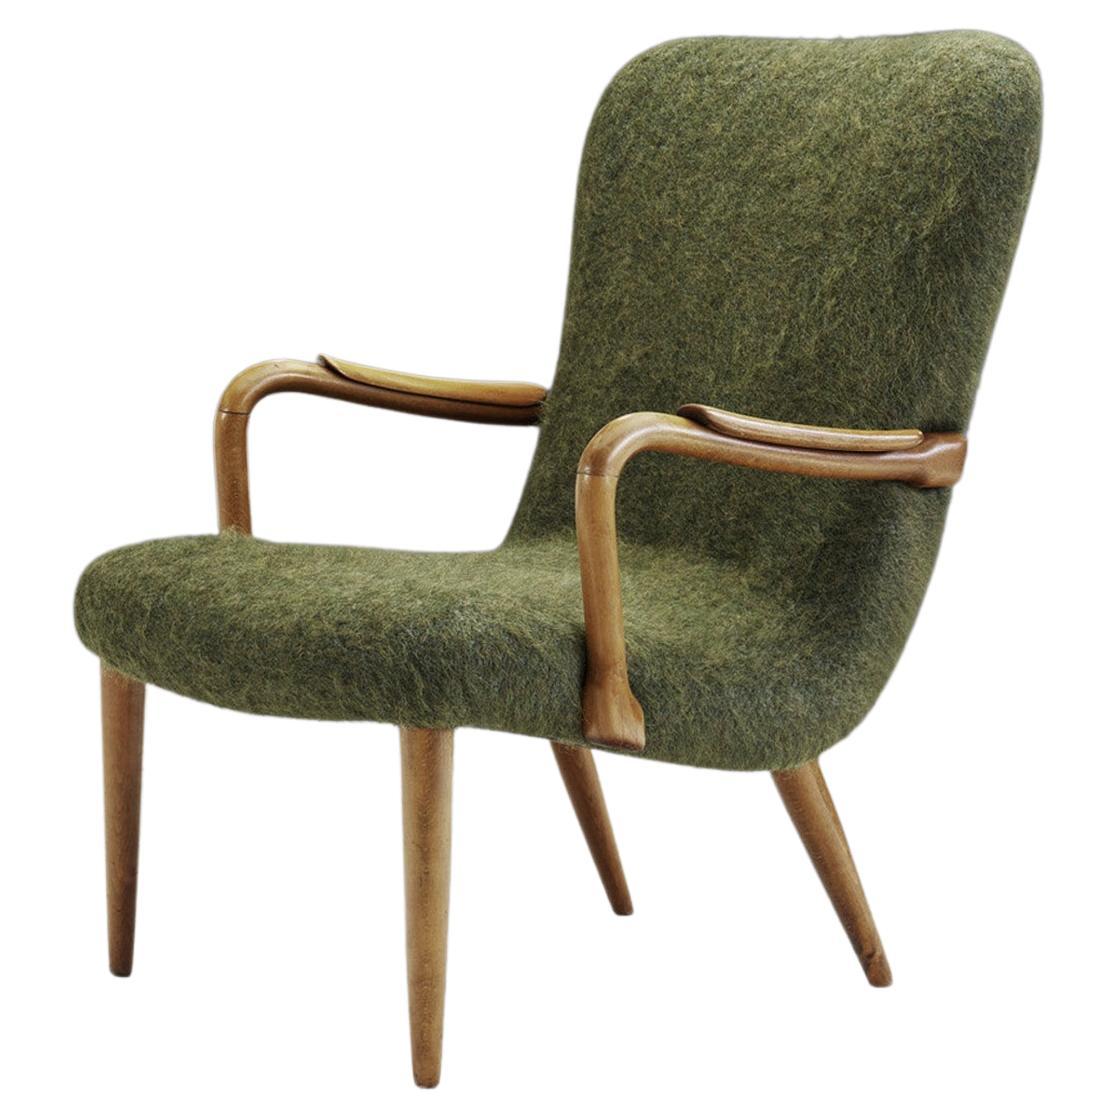 Danish Upholstered Easy Chair with Stained Beech Frame, Denmark, 1950s For Sale